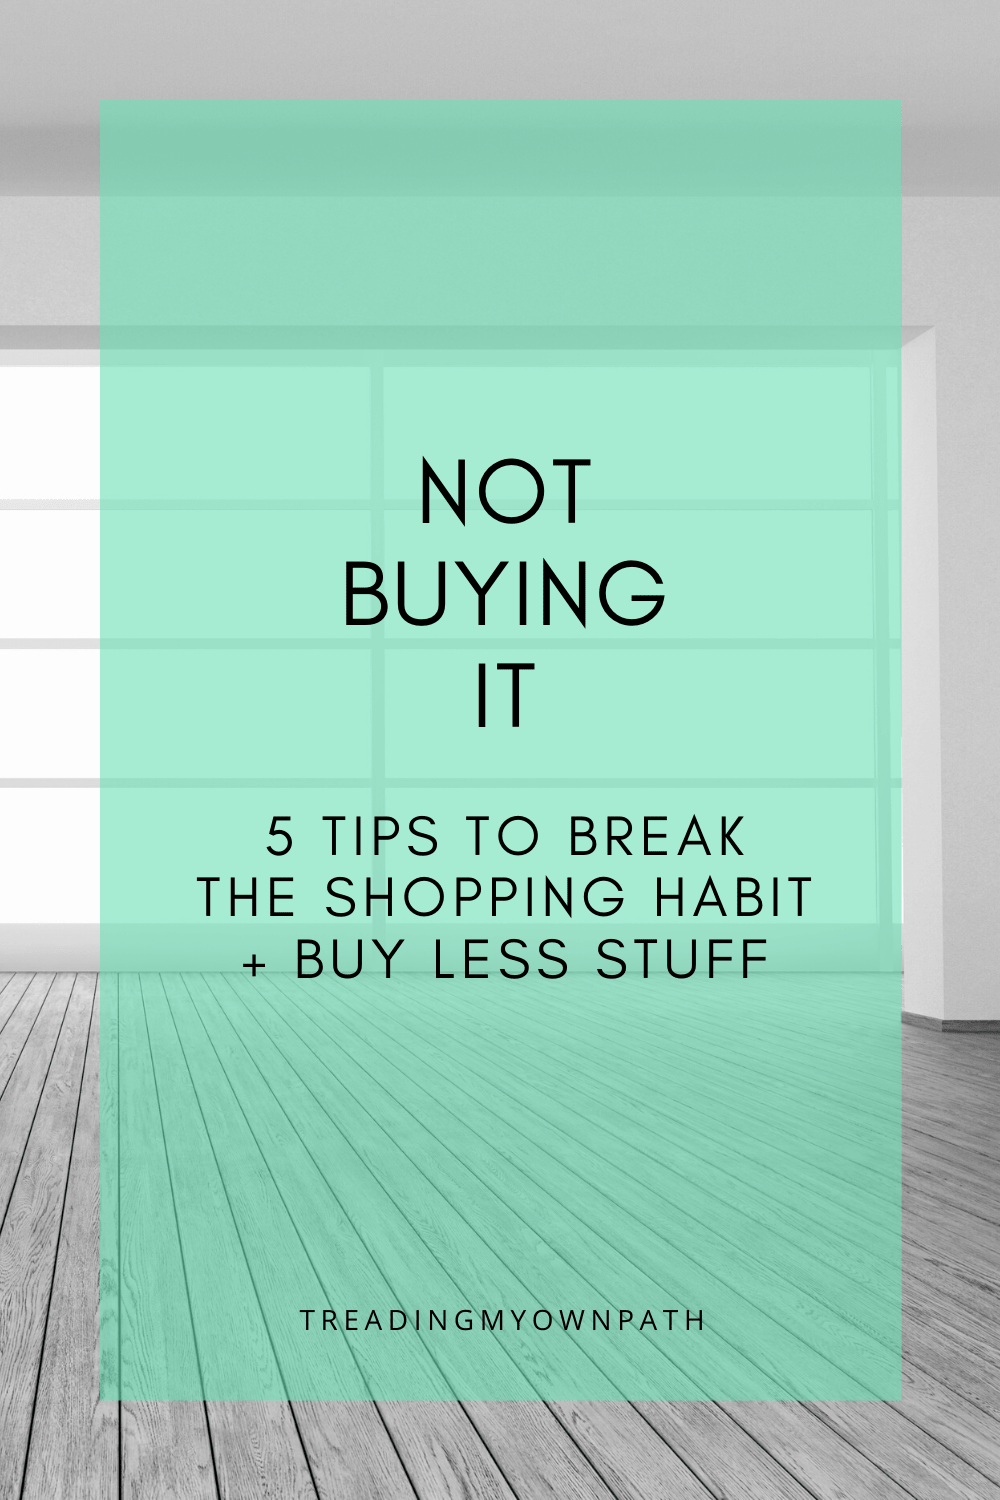 Not buying it: 5 tips for buying less stuff